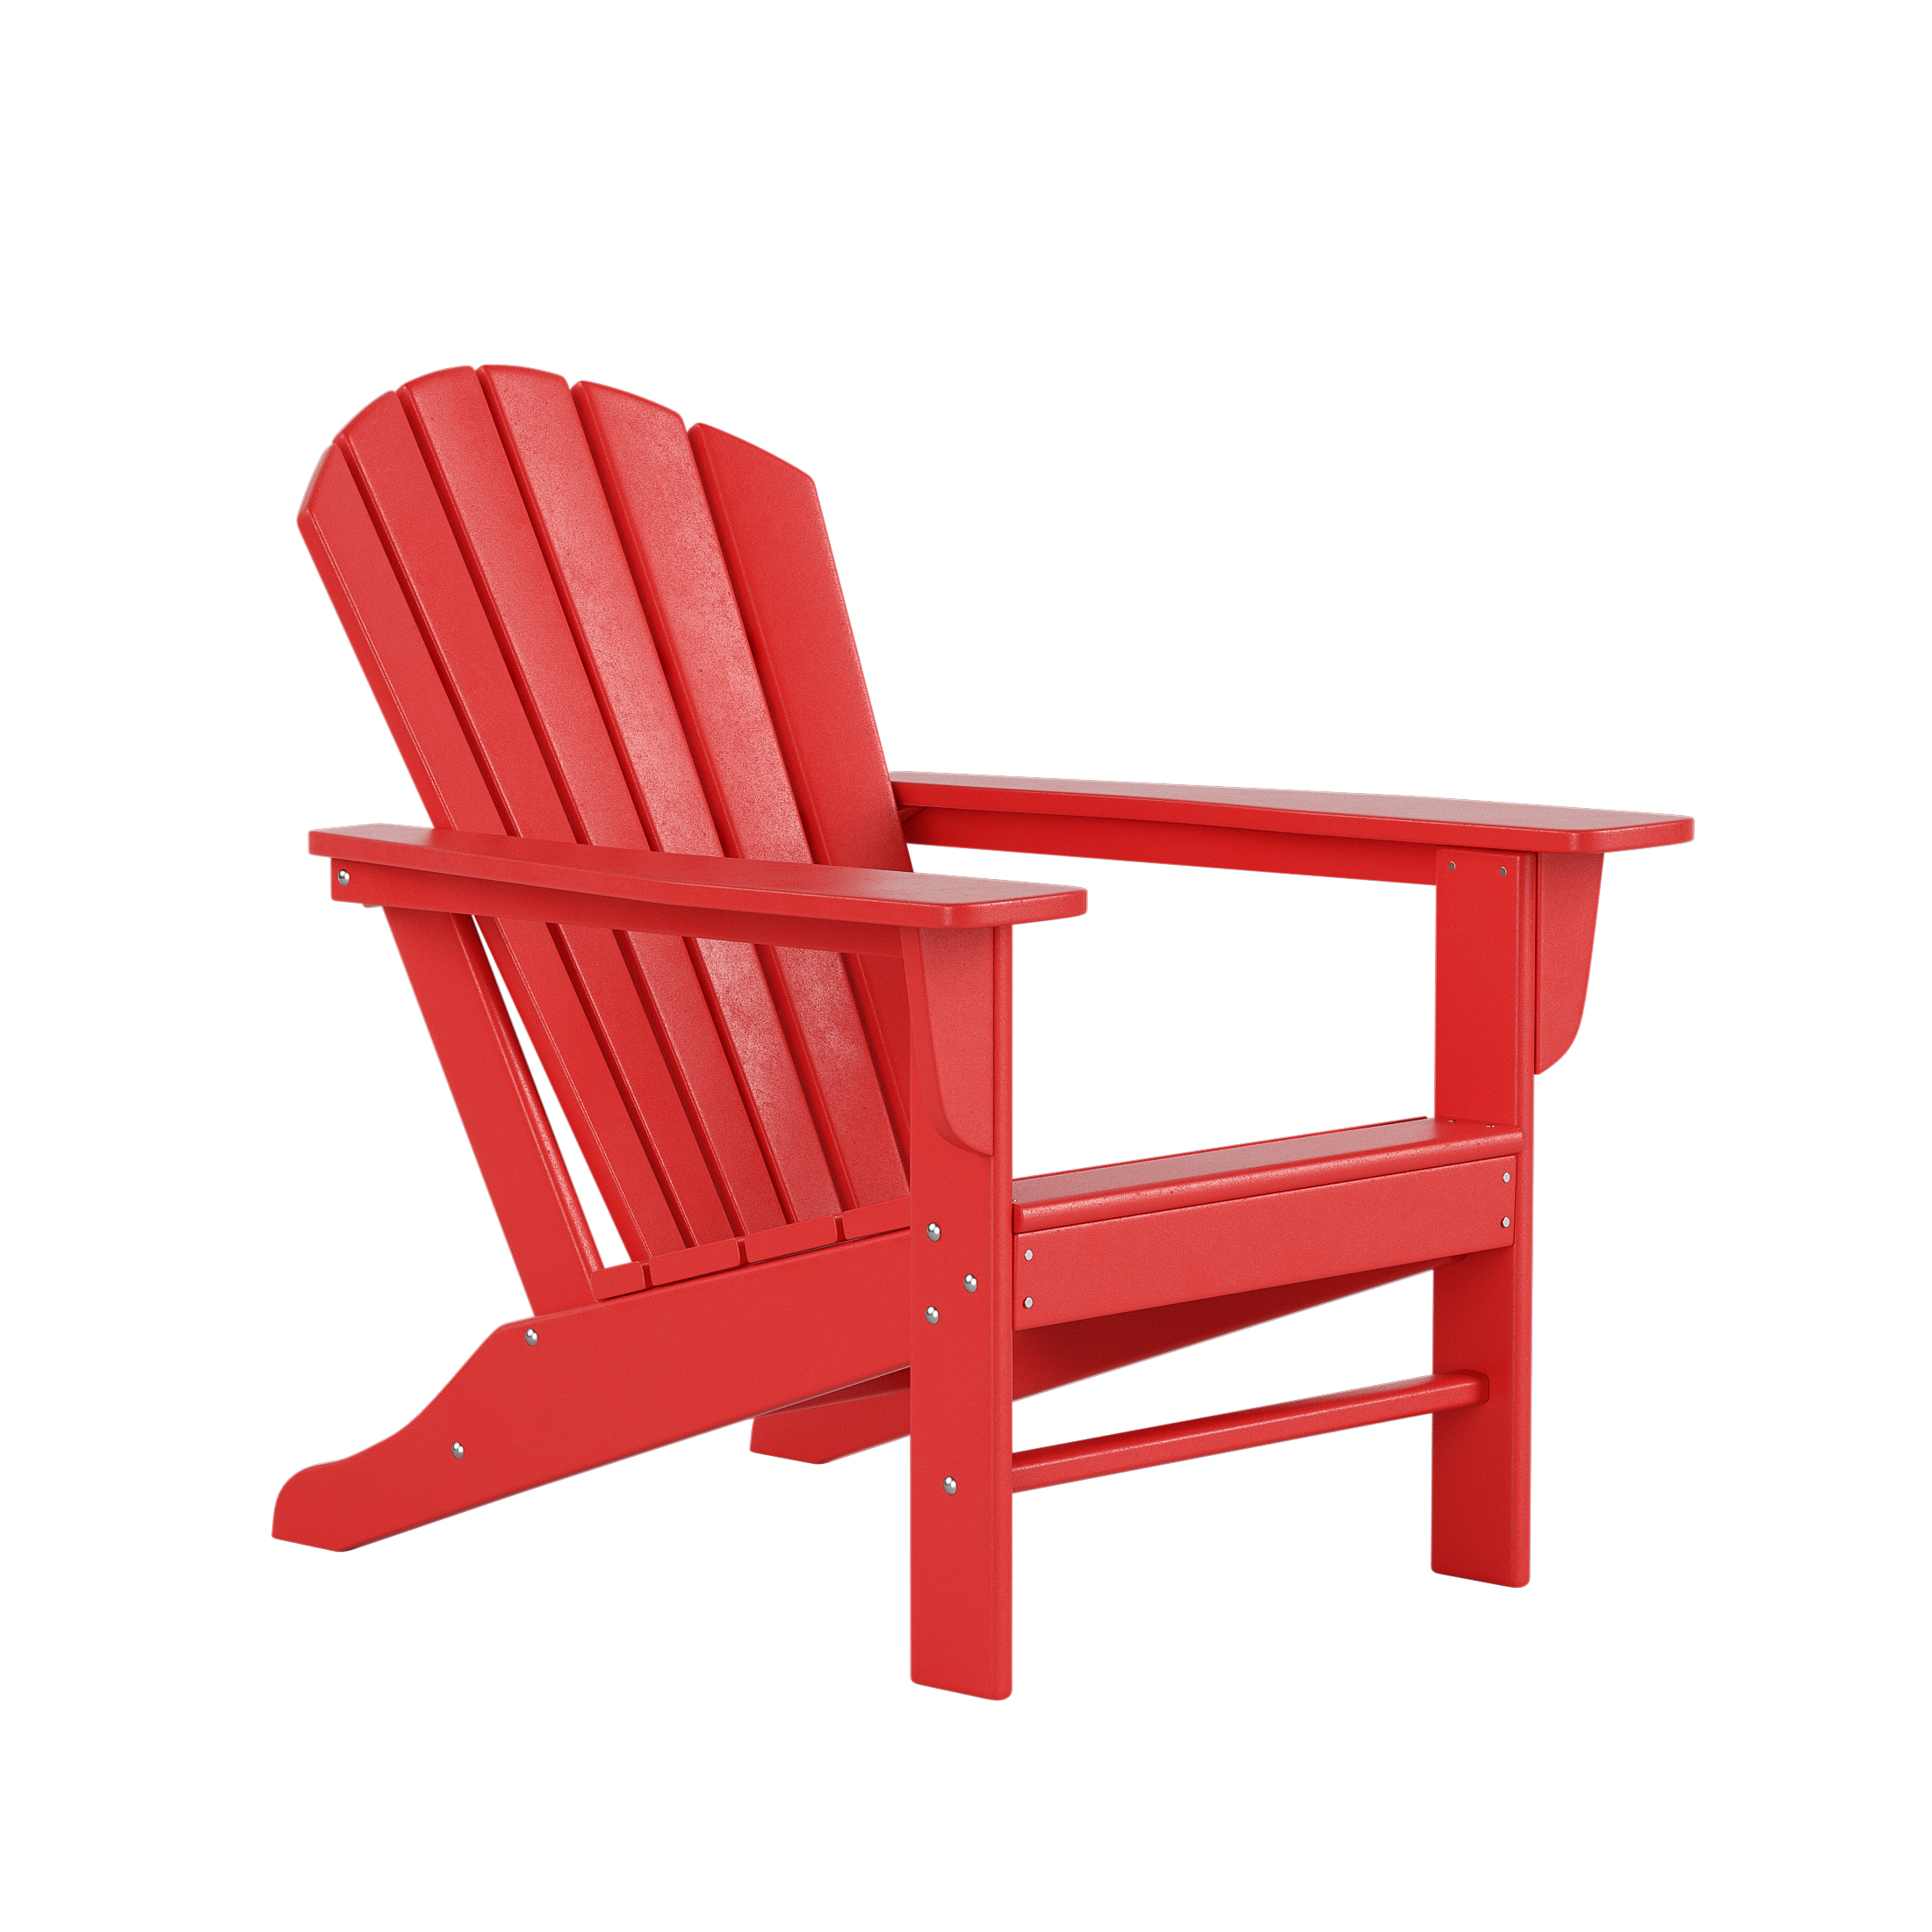 WestinTrends Dylan Outdoor Lounge Chairs Set of 2, 5 Pieces Seashell Adirondack Chairs with Ottoman and Side Table, All Weather Poly Lumber Outdoor Patio Chairs Furniture Set, Red - image 4 of 9